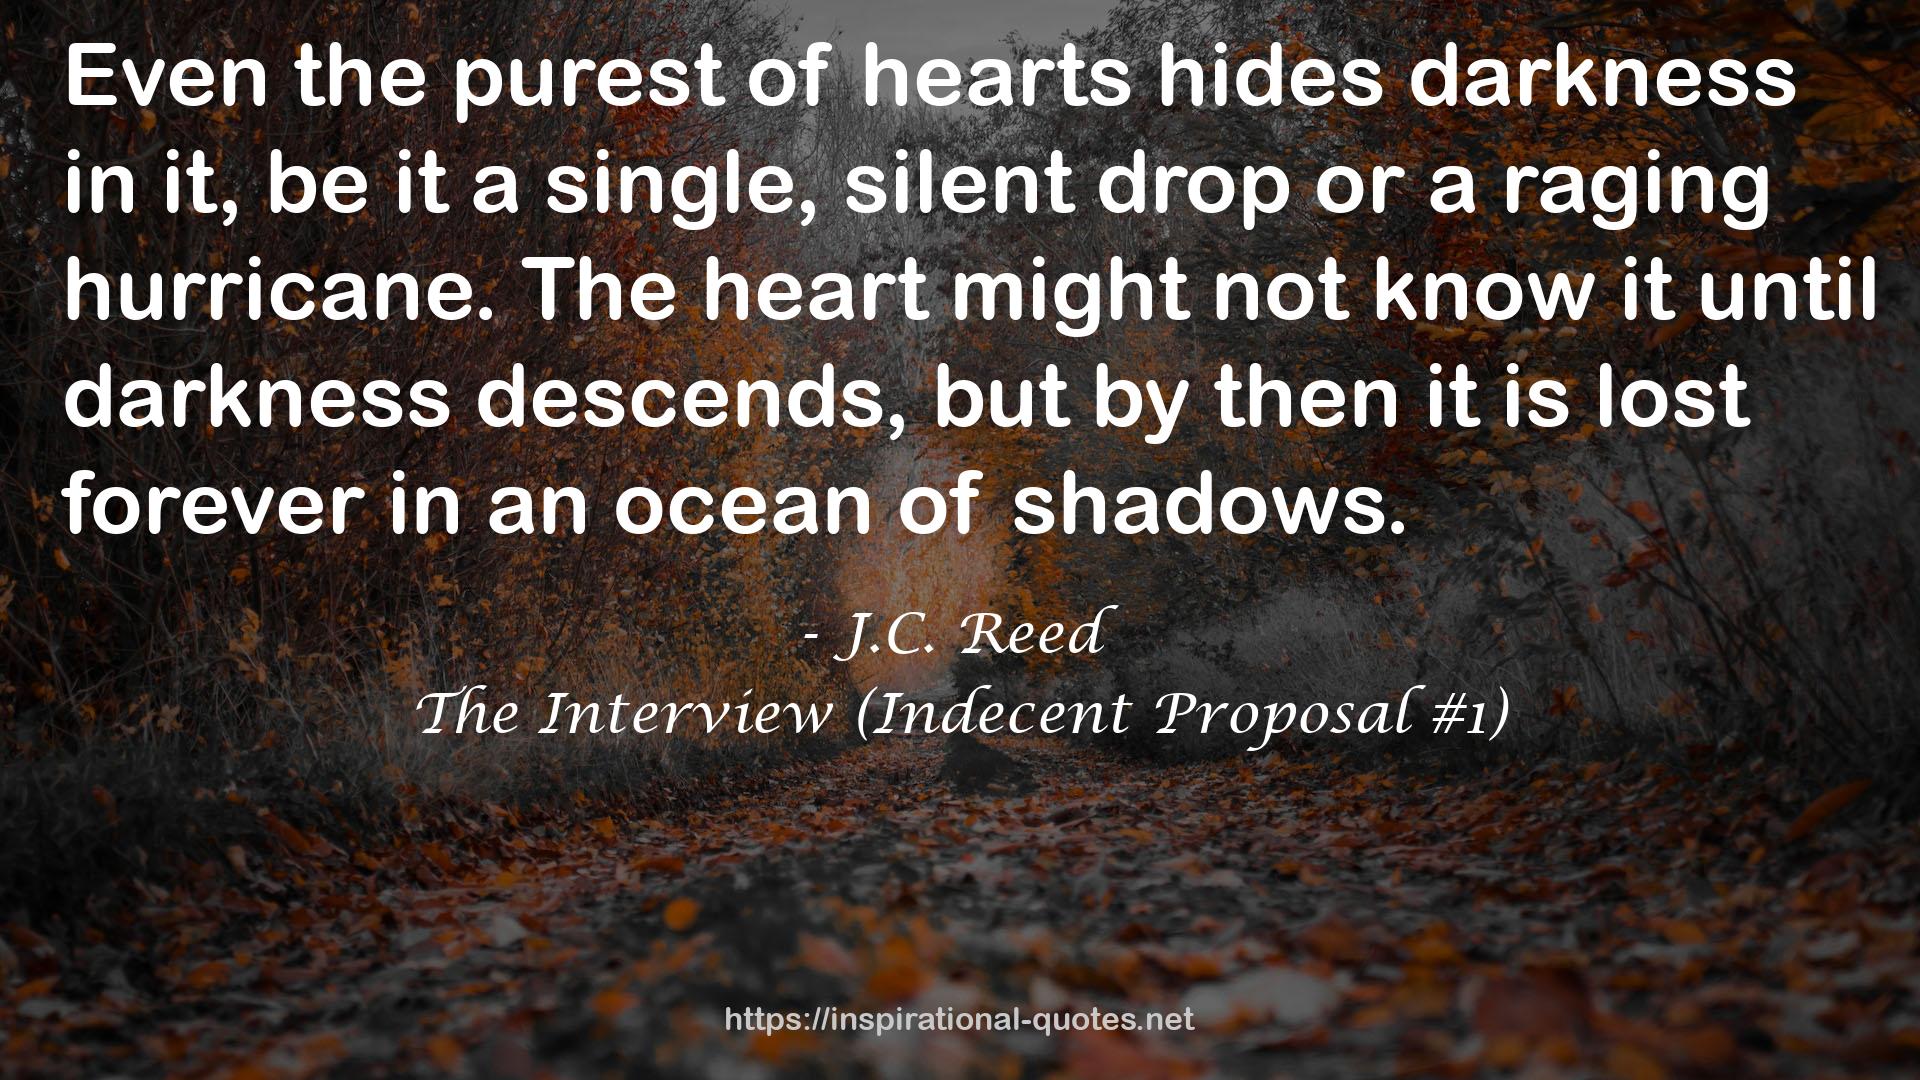 The Interview (Indecent Proposal #1) QUOTES